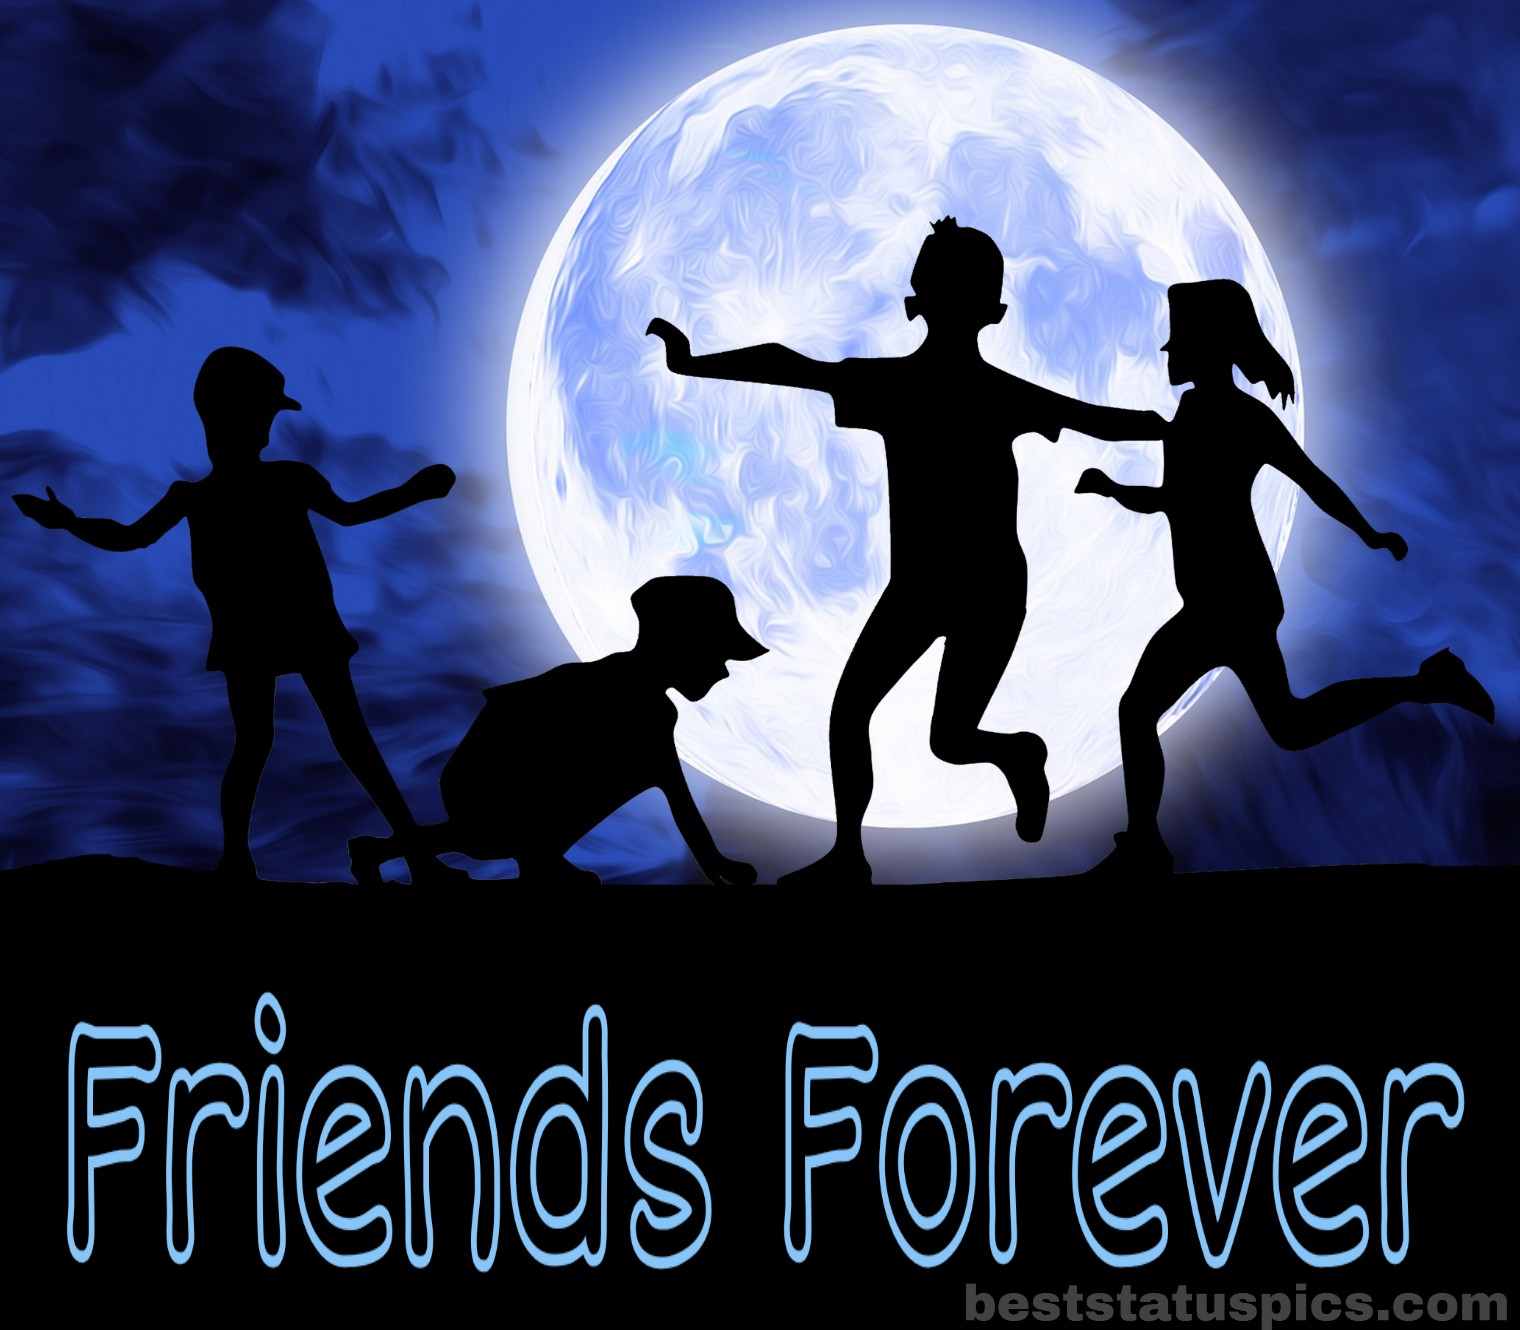 pix Wallpaper Best Friends Forever Dp For Whatsapp Group friends forever wh...